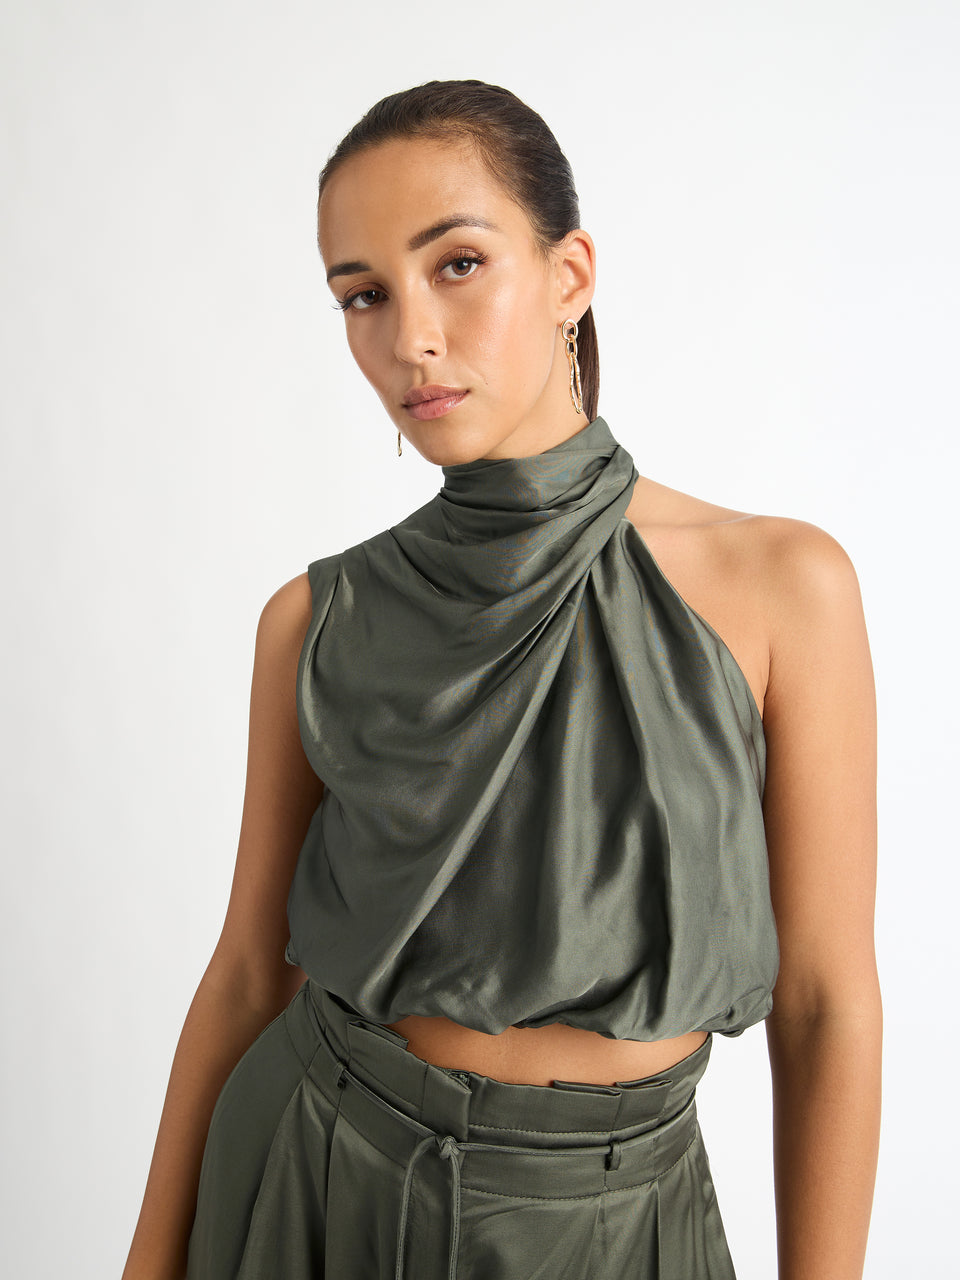 Best Selling Dresses, Tops, Bottoms & Accessories | SHEIKE